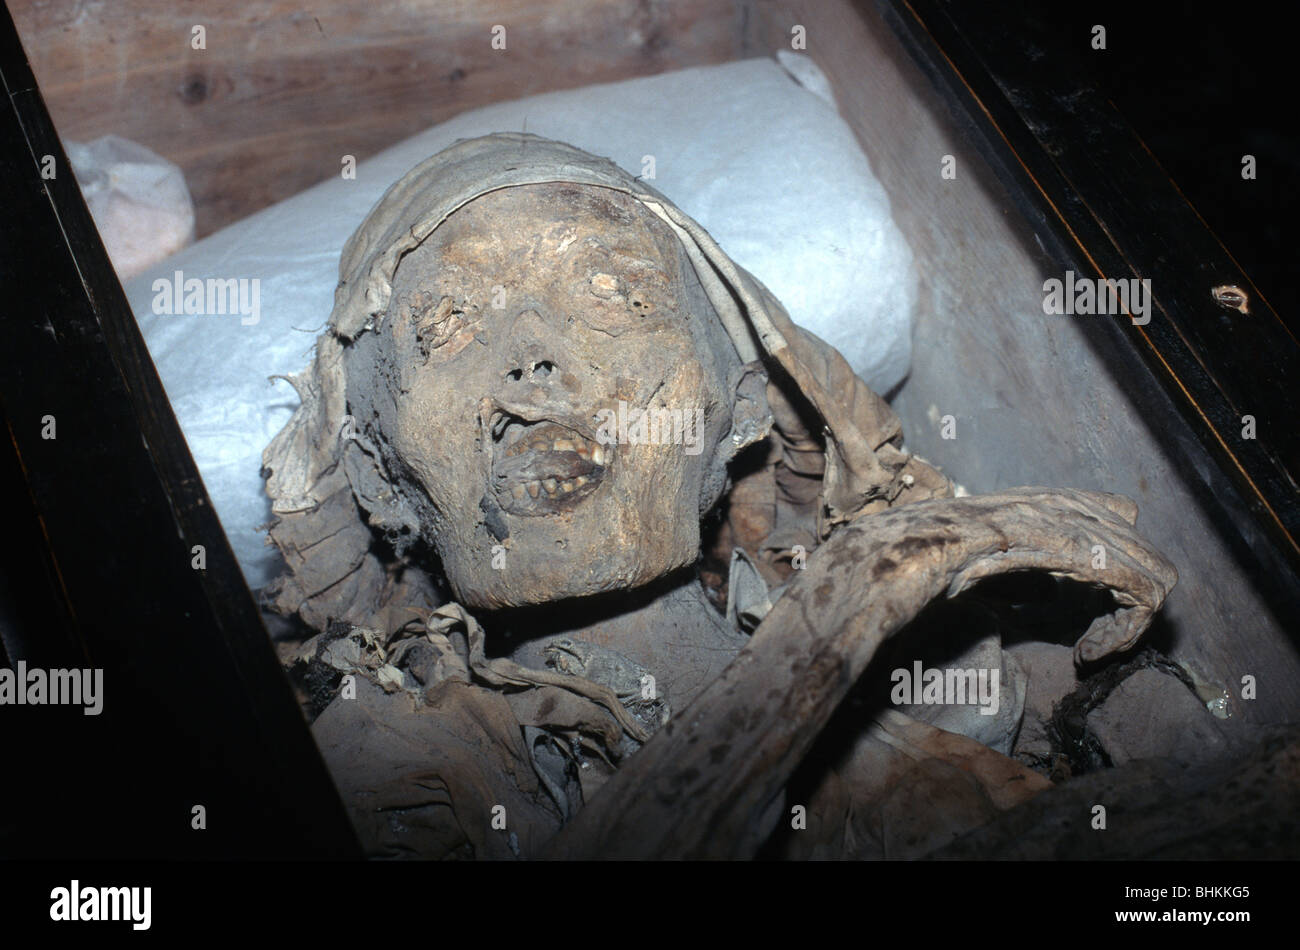 Clothed mummified corpse in a coffin in the catacombs in the Templo del Carmen, Mexico City, Mexico. Stock Photo